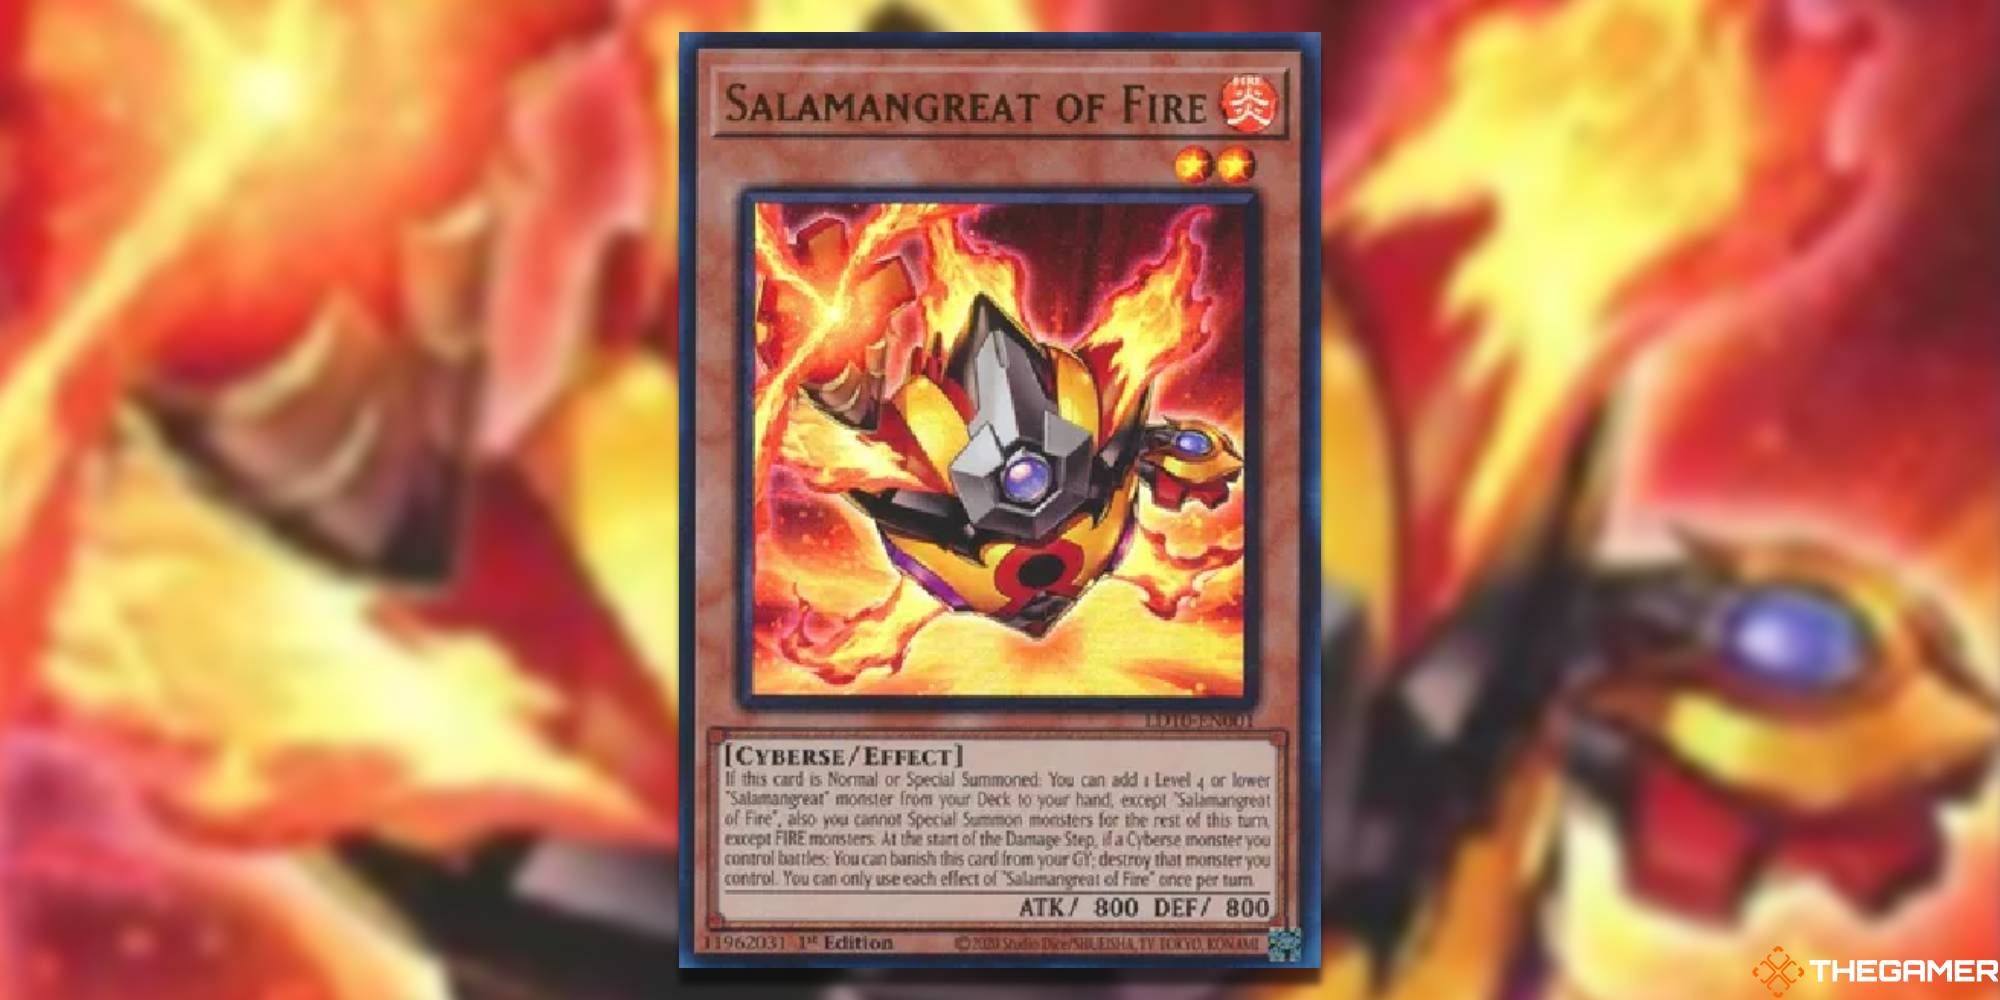 YGO Salamangreat Of Fire card and art background